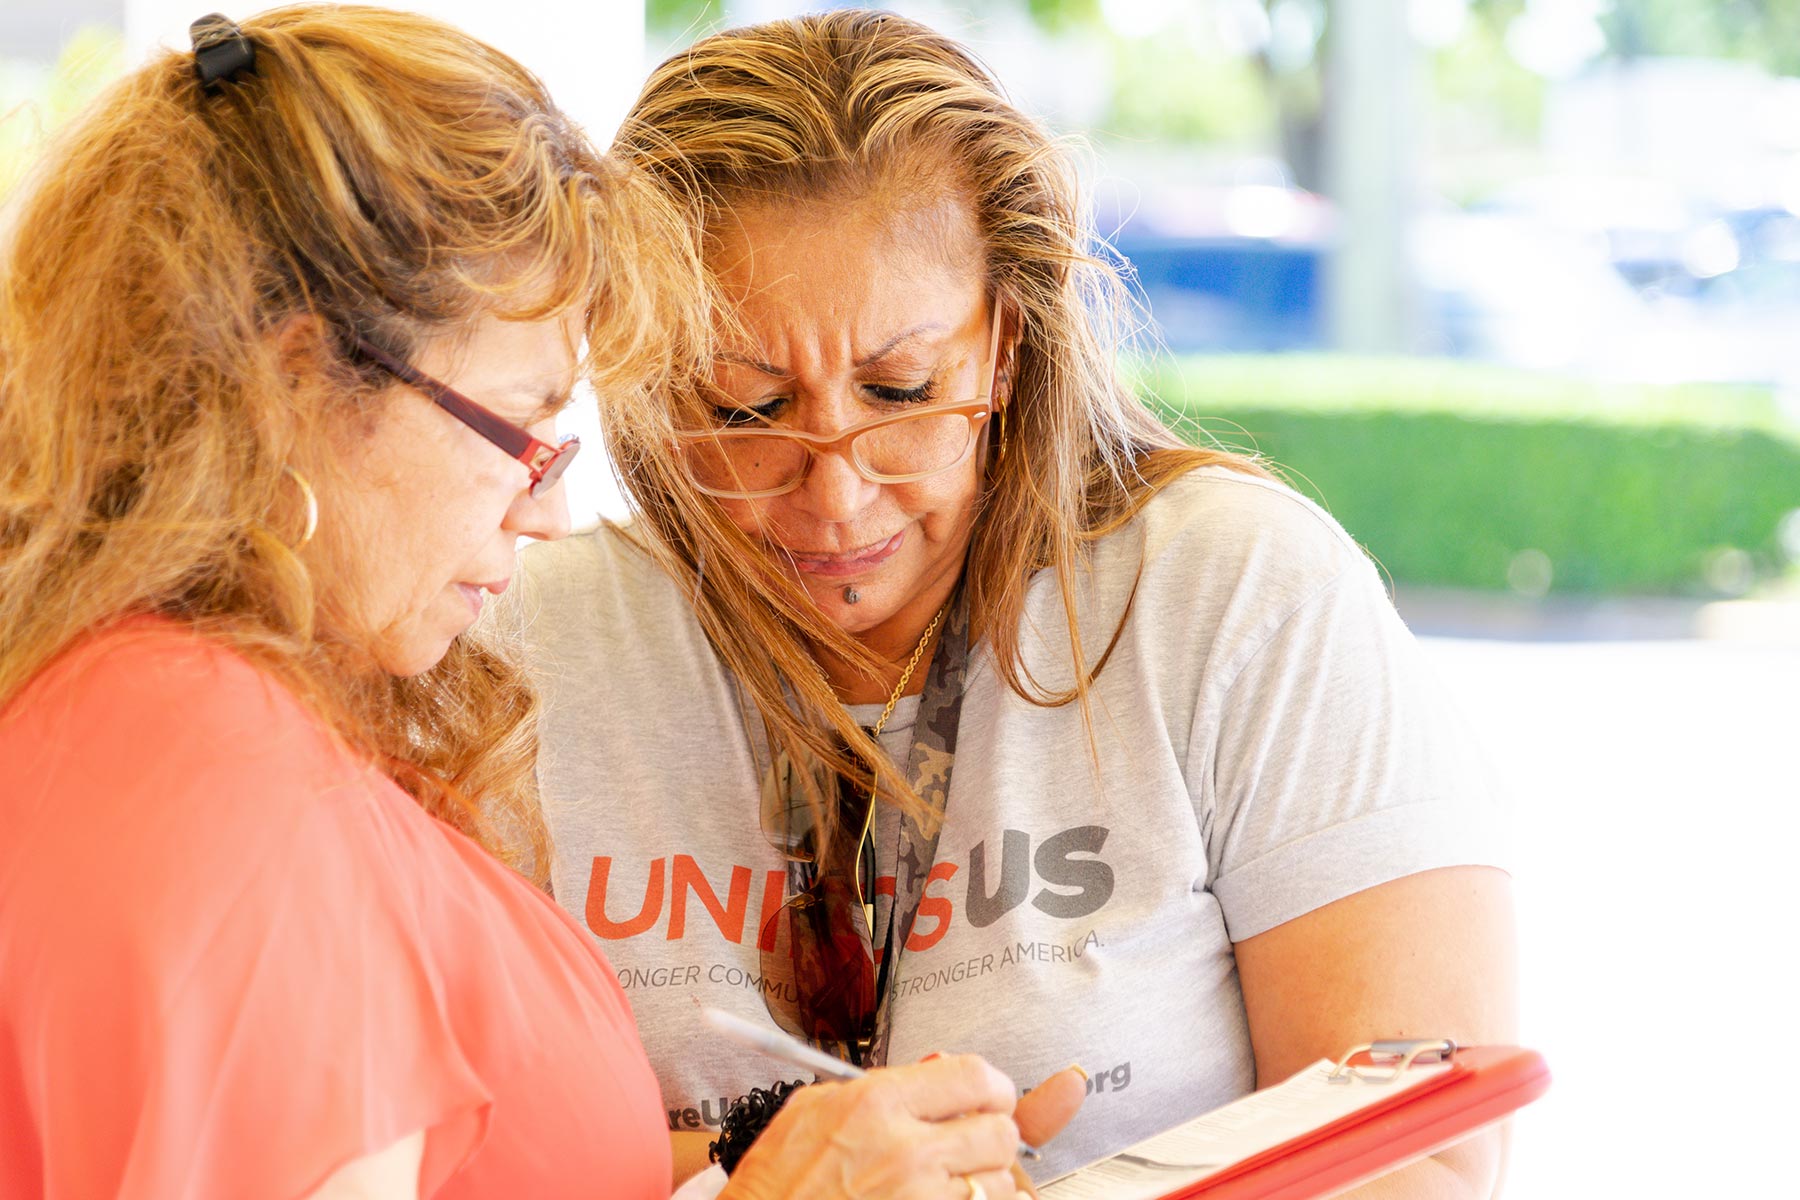 UnidosUS canvassers in Florida have already registered more than 21,000 voters in that state. We are working to build on that success with in-person voter canvassing in Texas, and across all our digital networks nationwide.